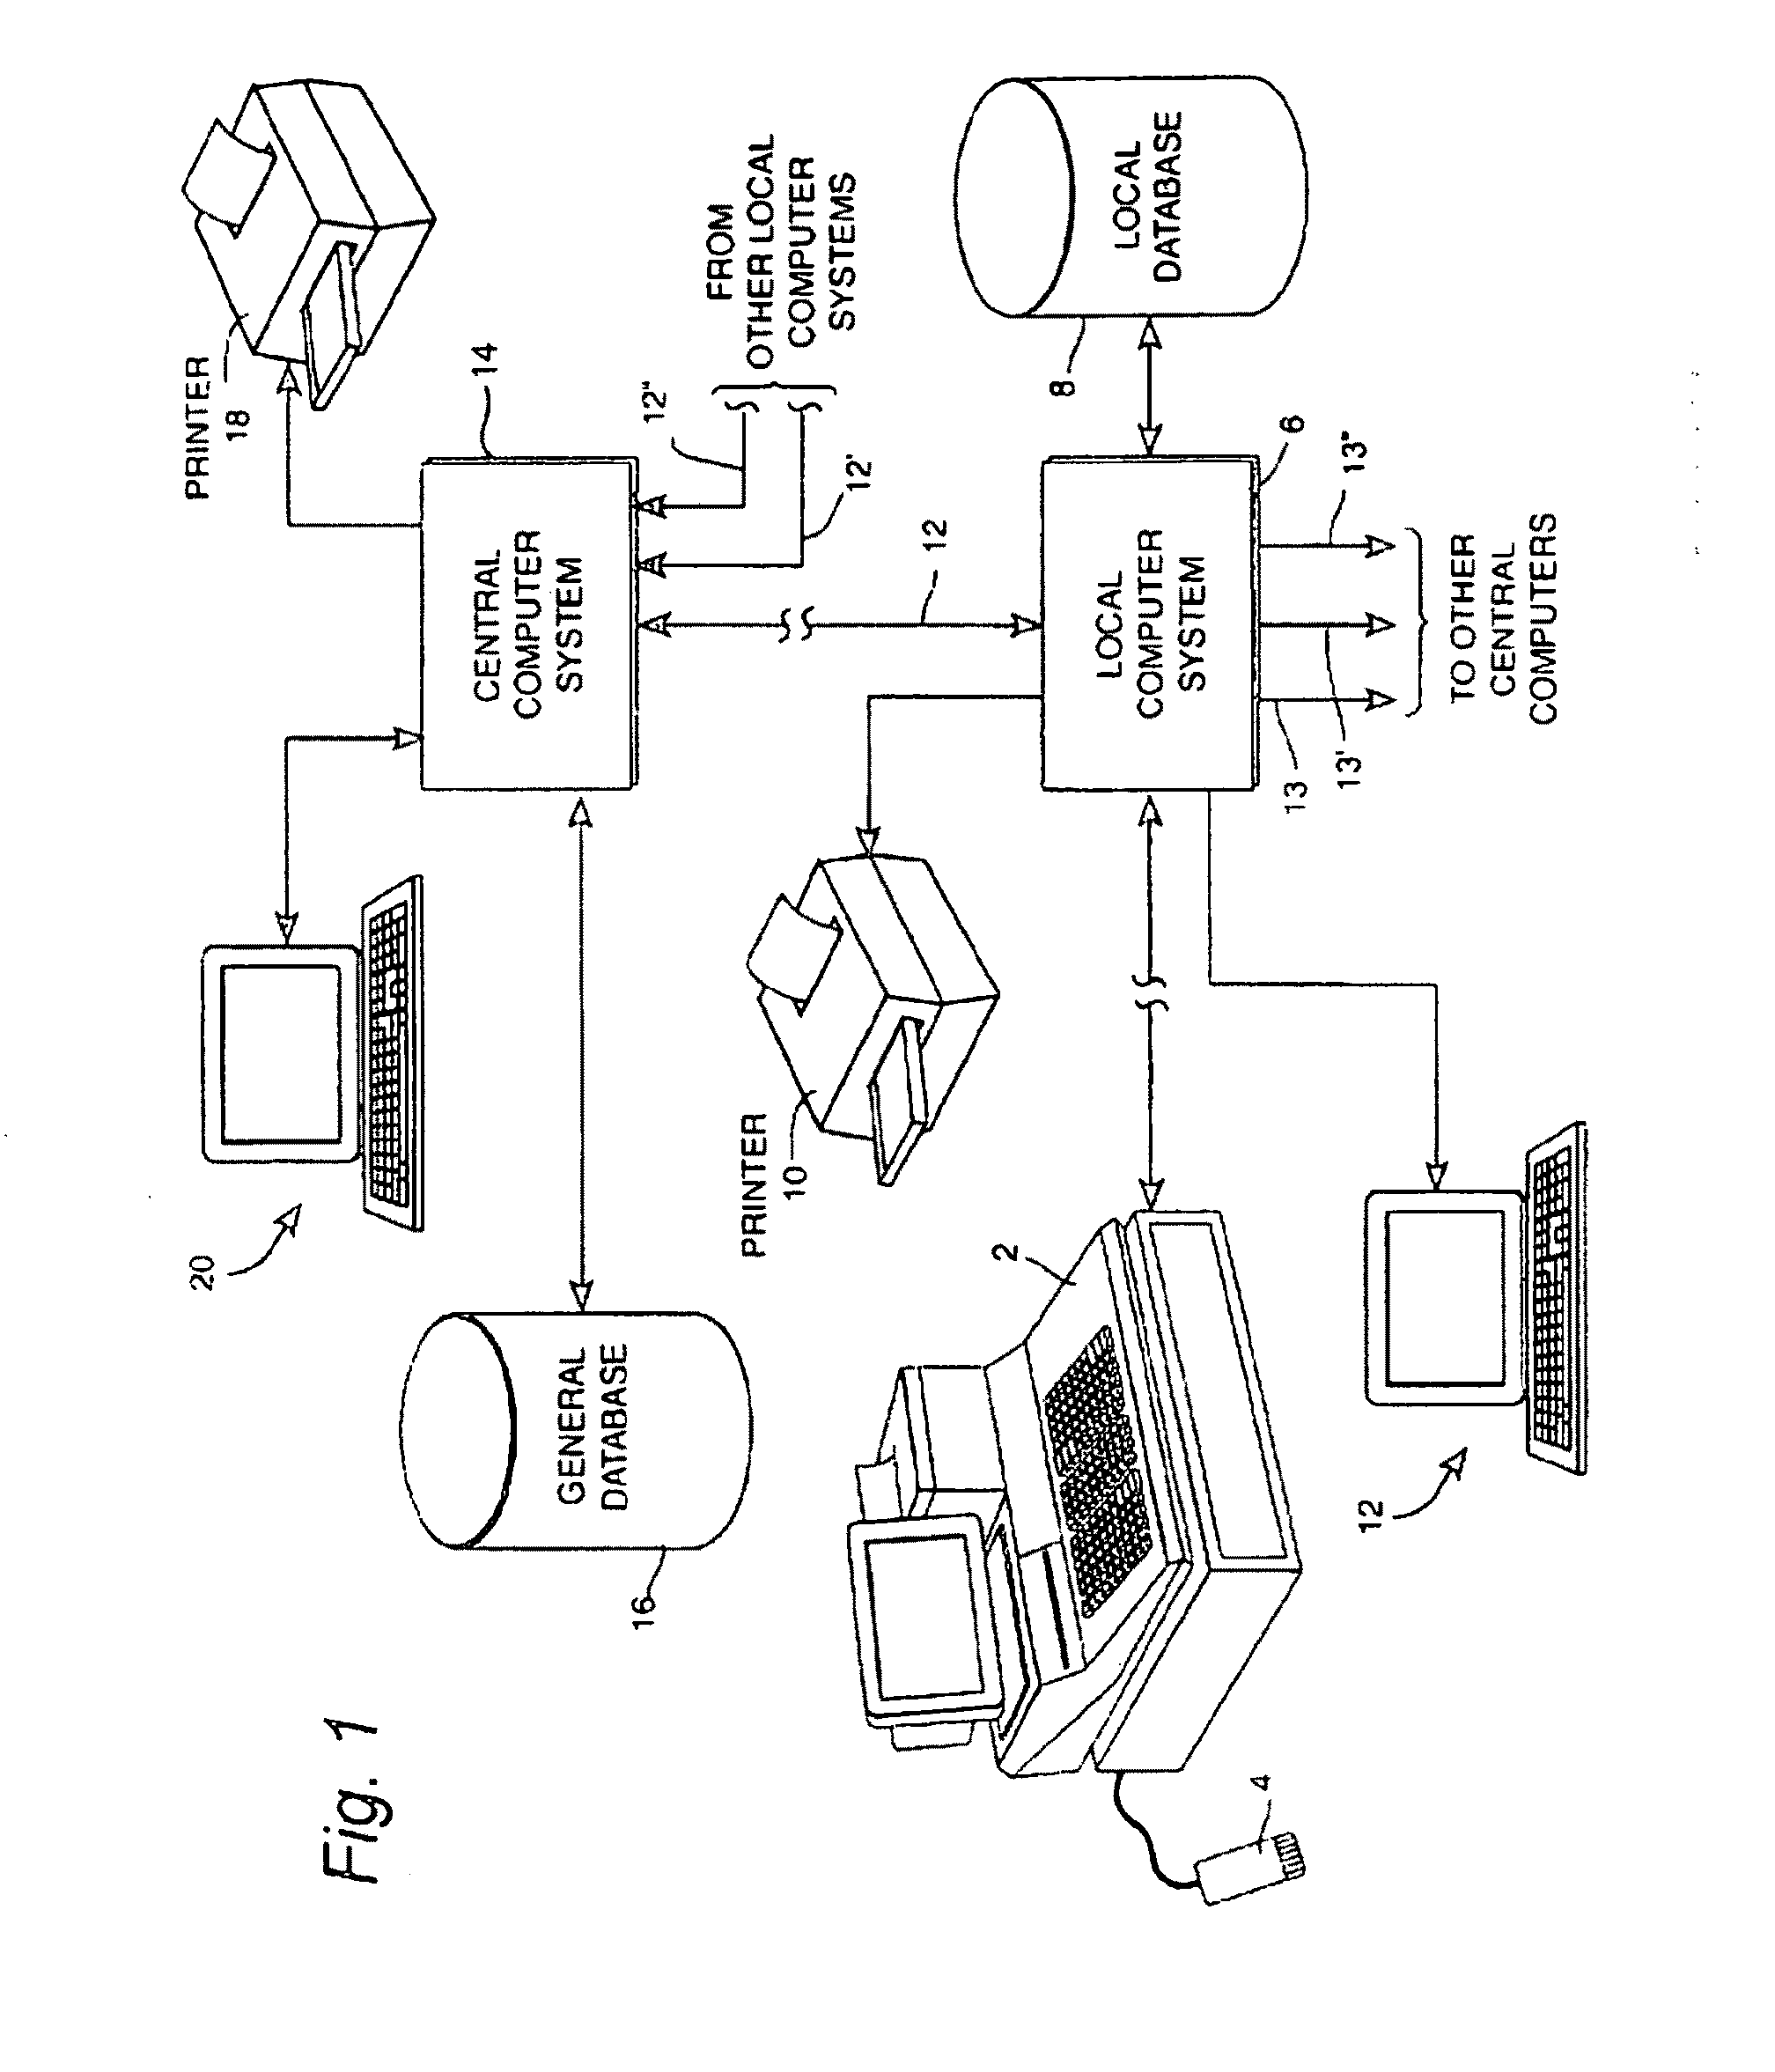 Systems and/or methods for globally tracking items and generating active notifications regarding the same